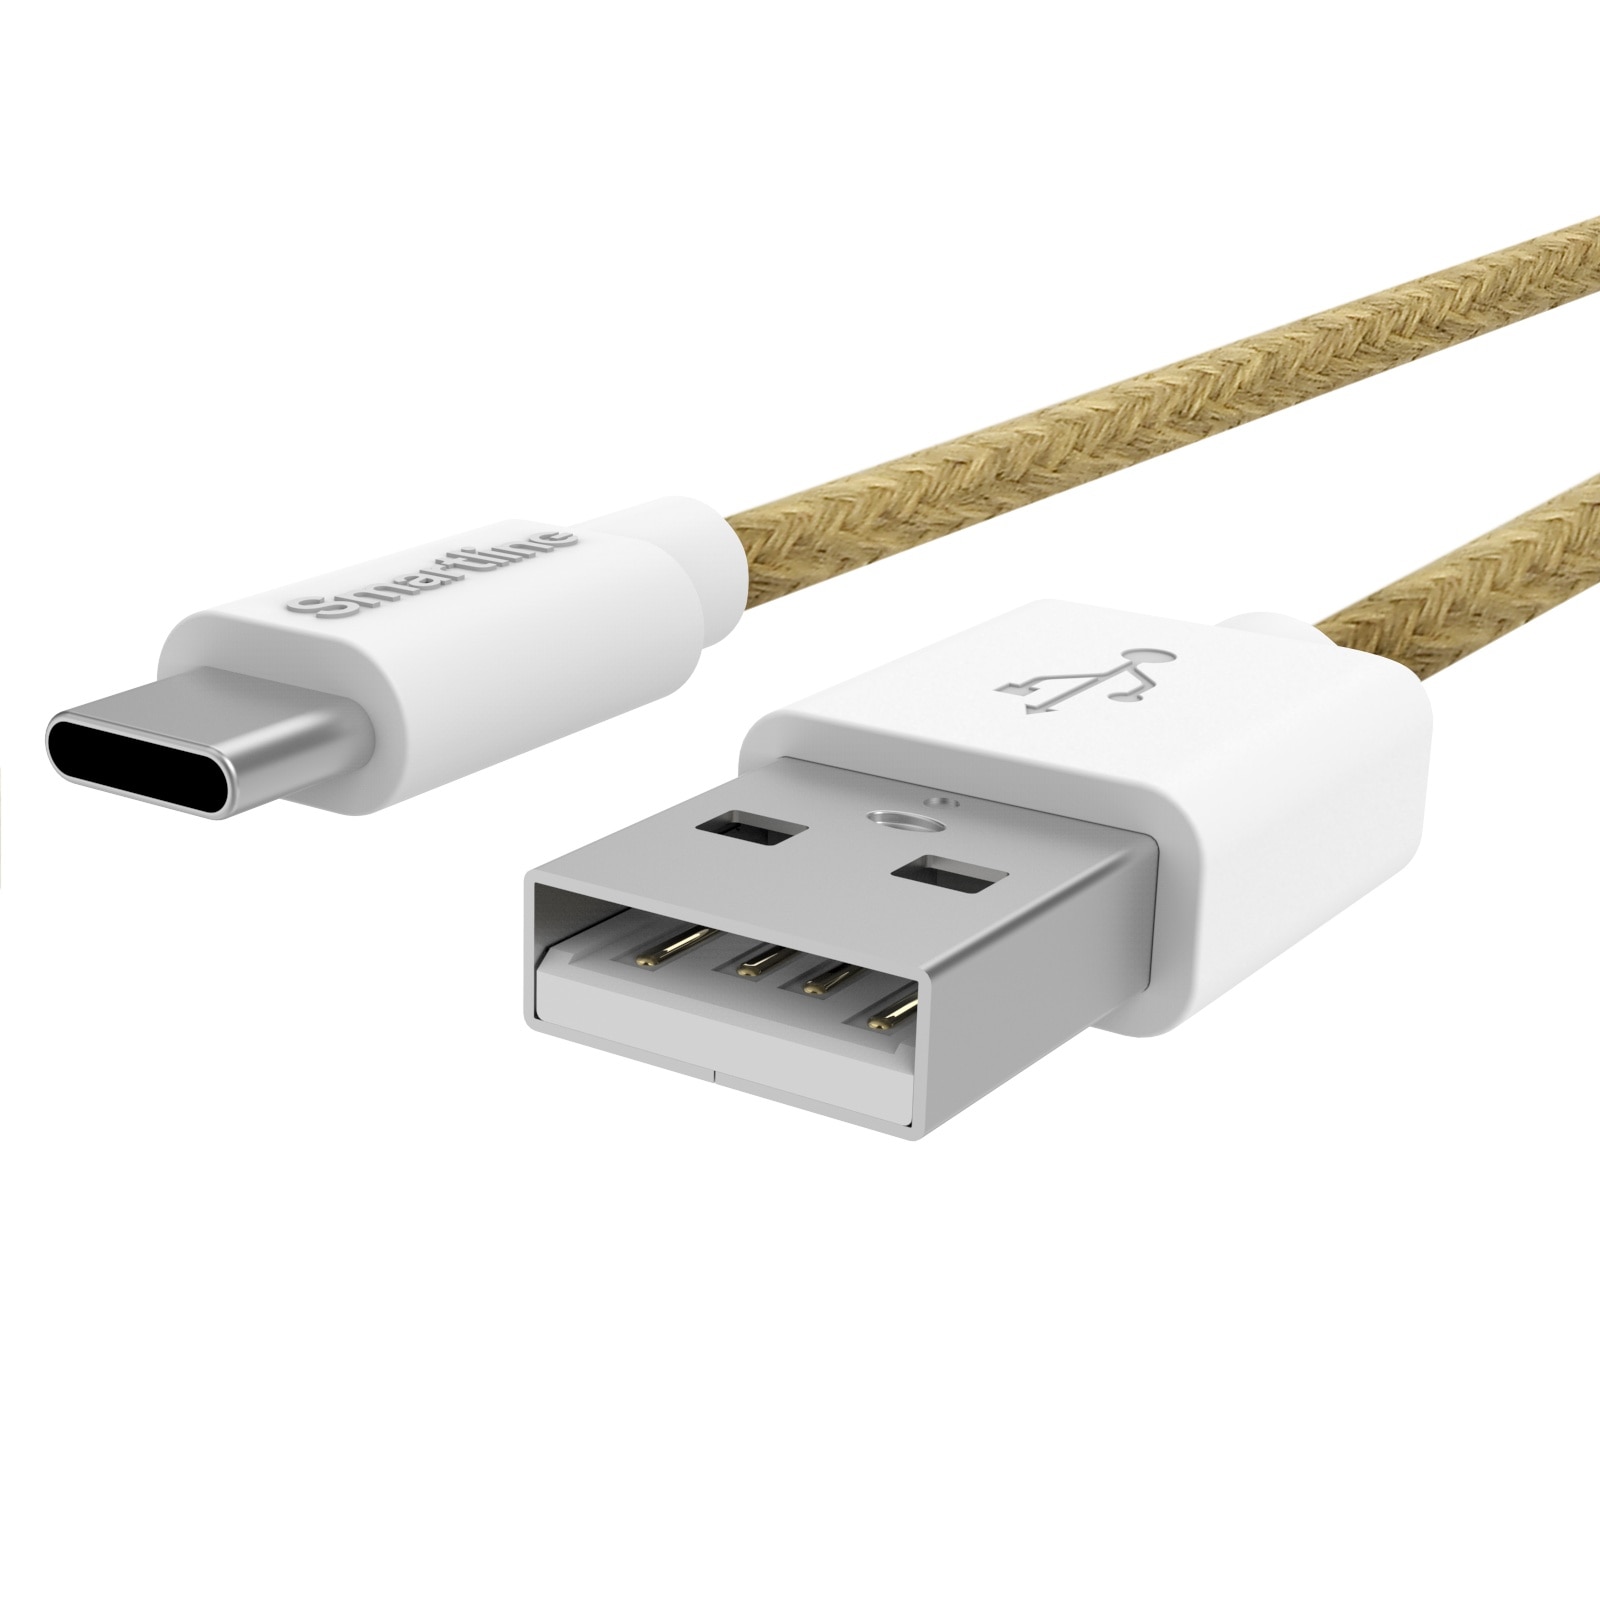 Fuzzy USB-A to USB-C Cable 2 meters Beige